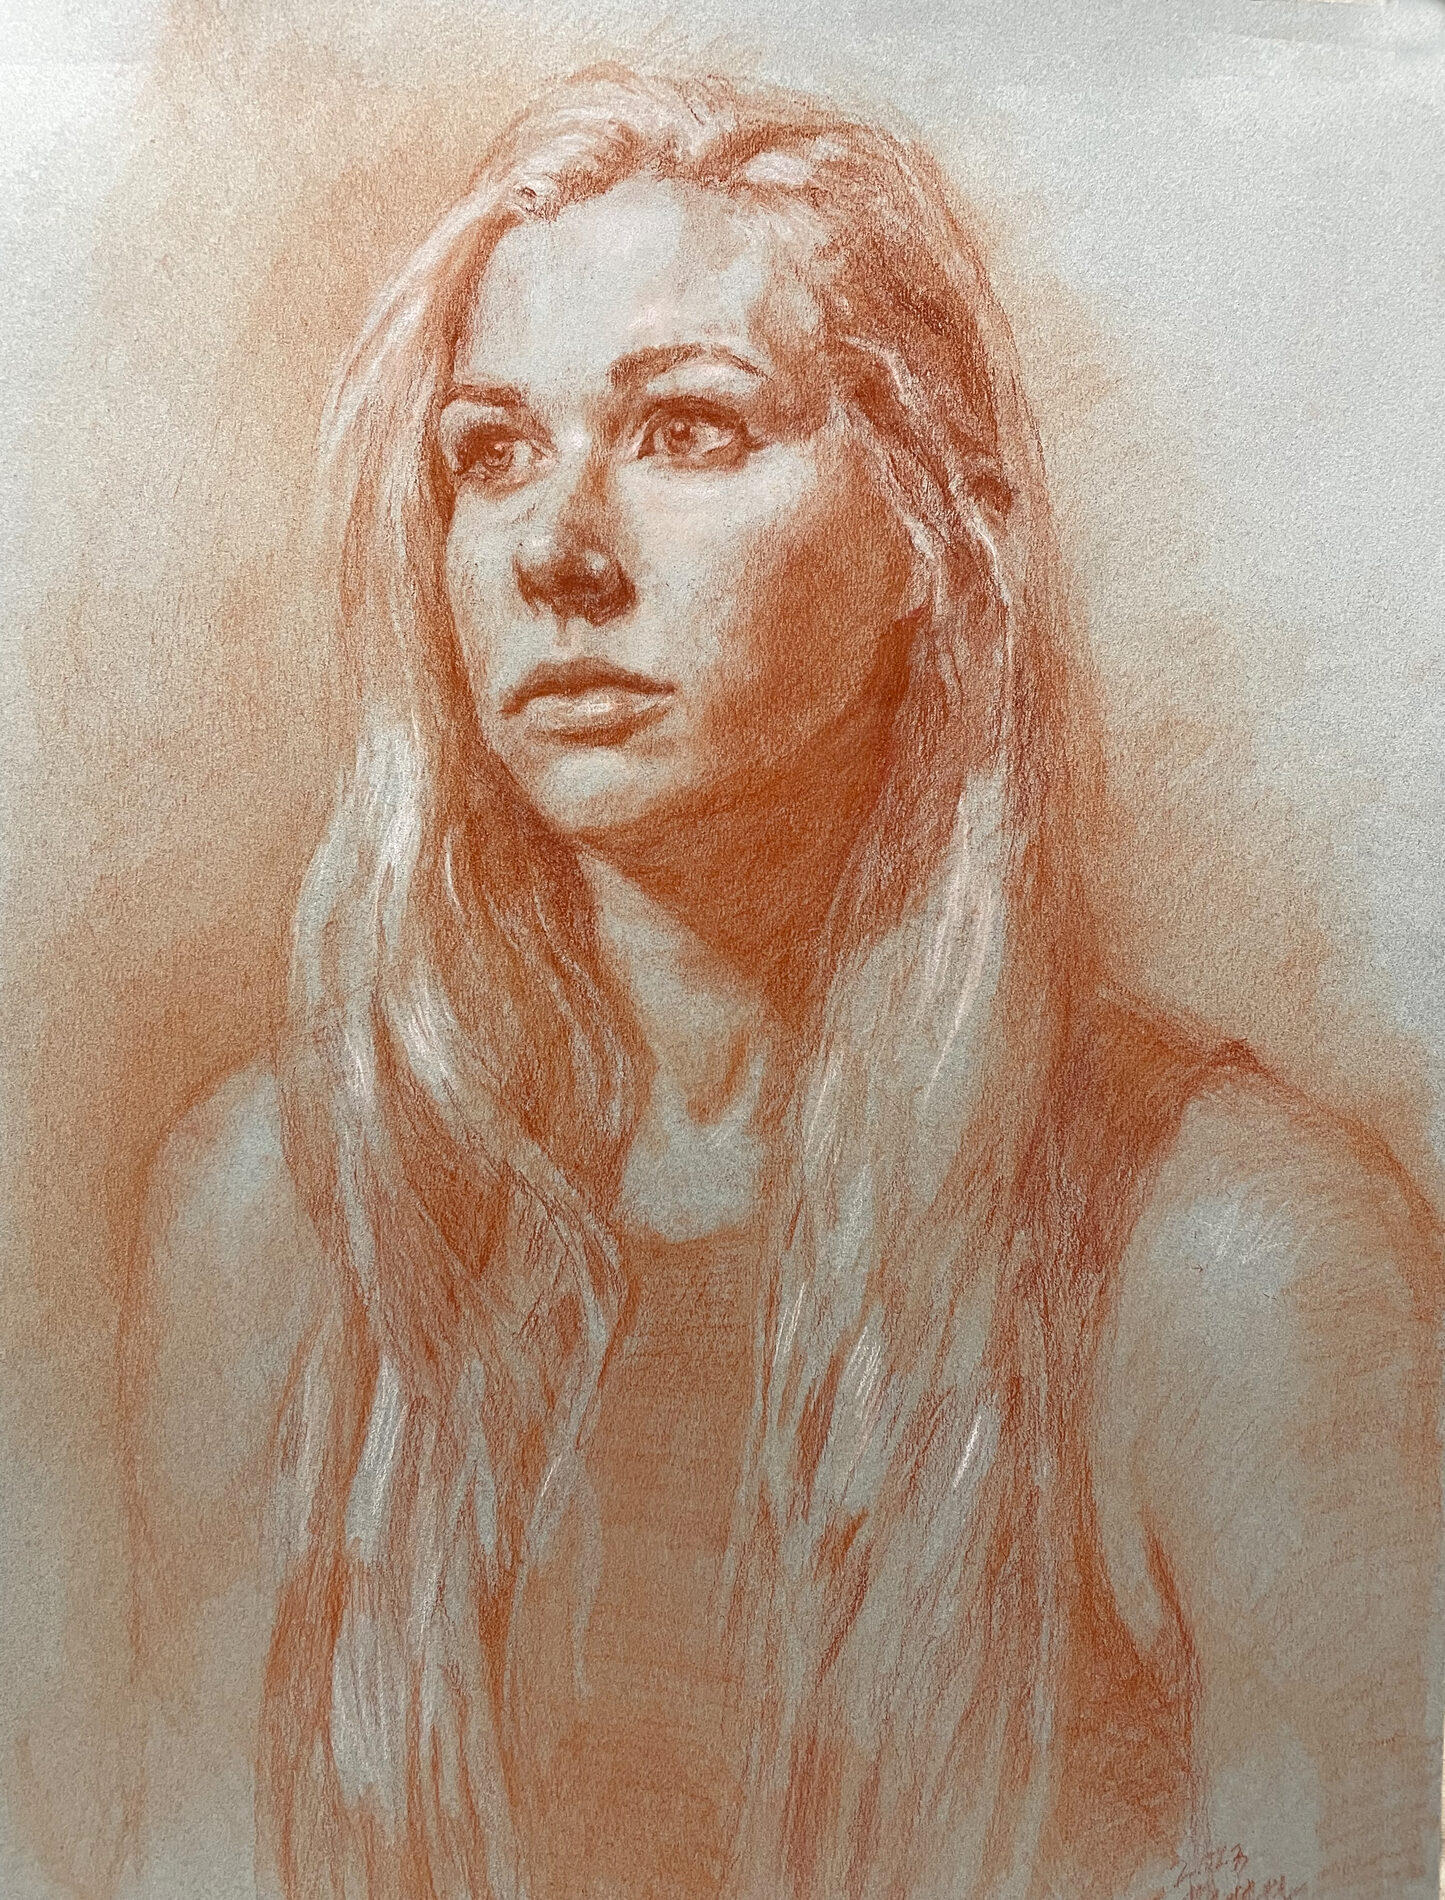 In shades of orange, a woman with long, light hair.